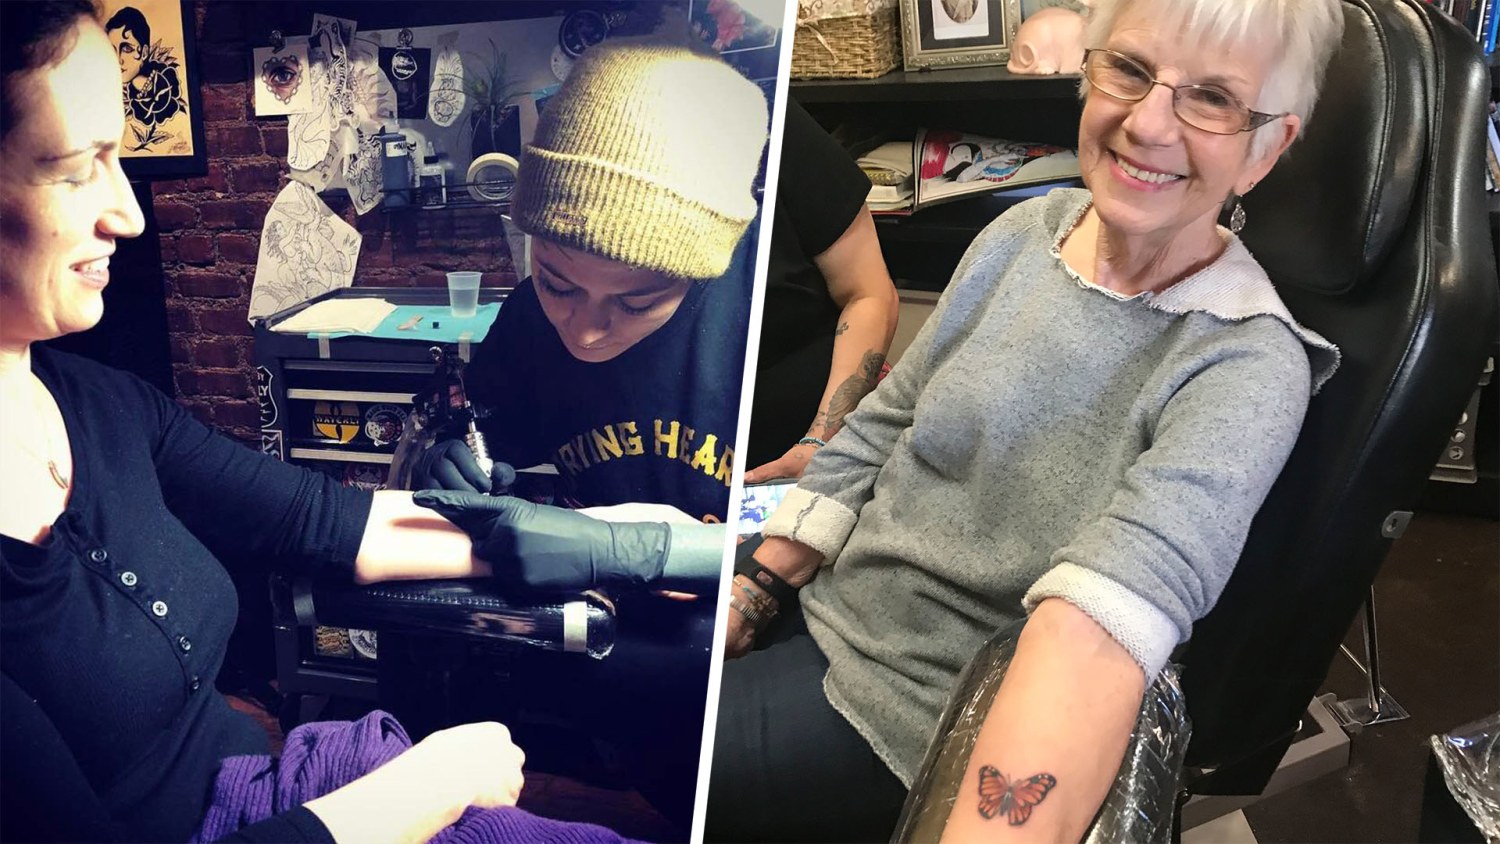 How Old You Have To Be To Get A Tattoo In Each State